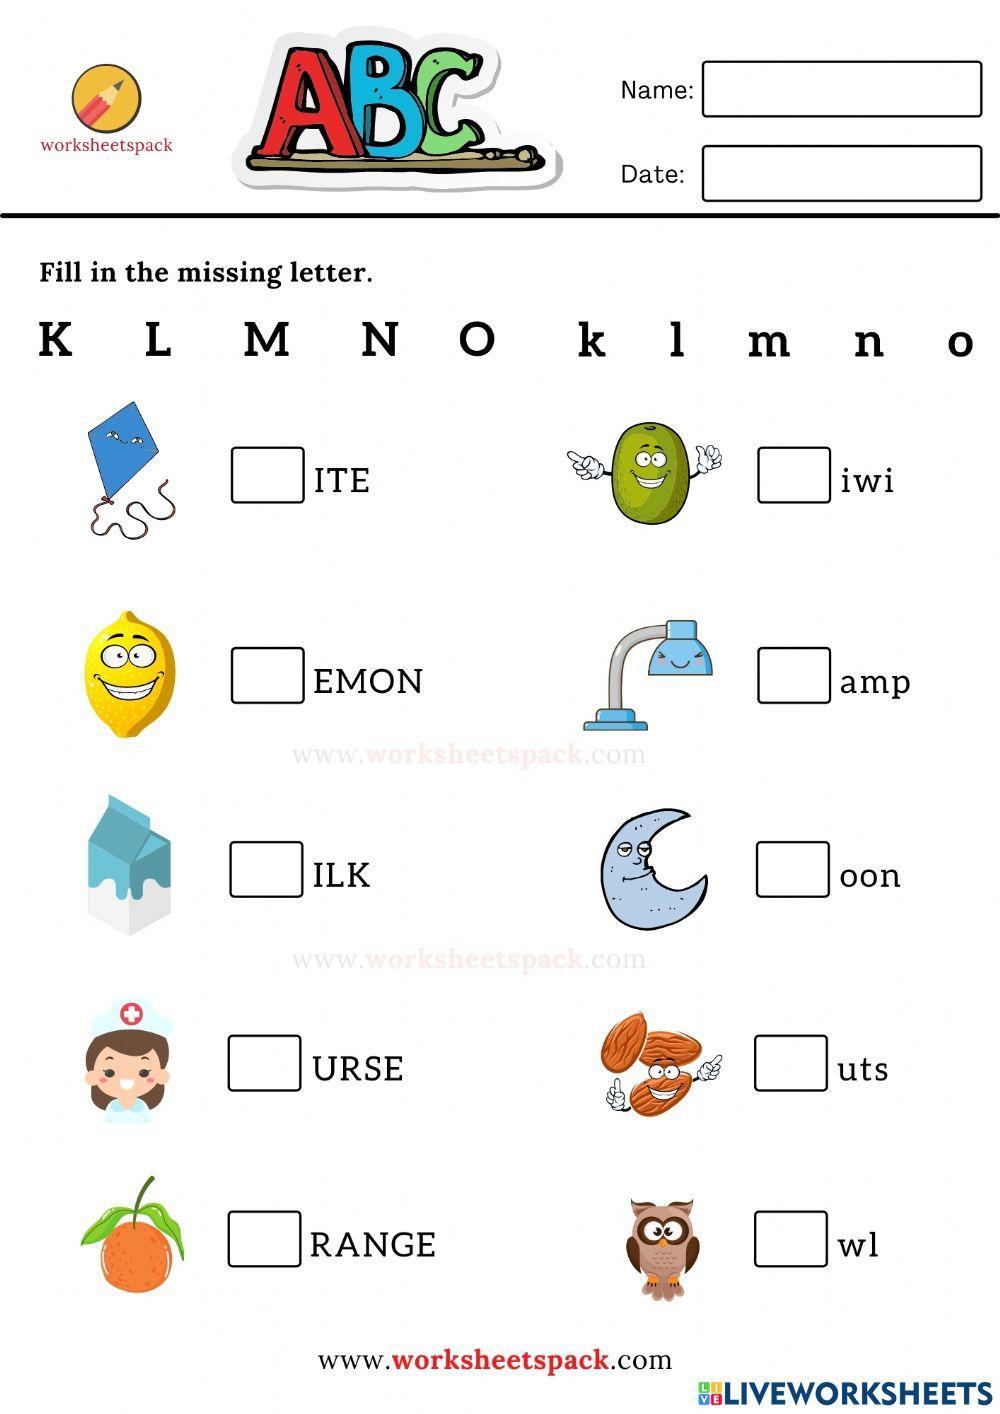 Fill in the missing letter worksheets K to O